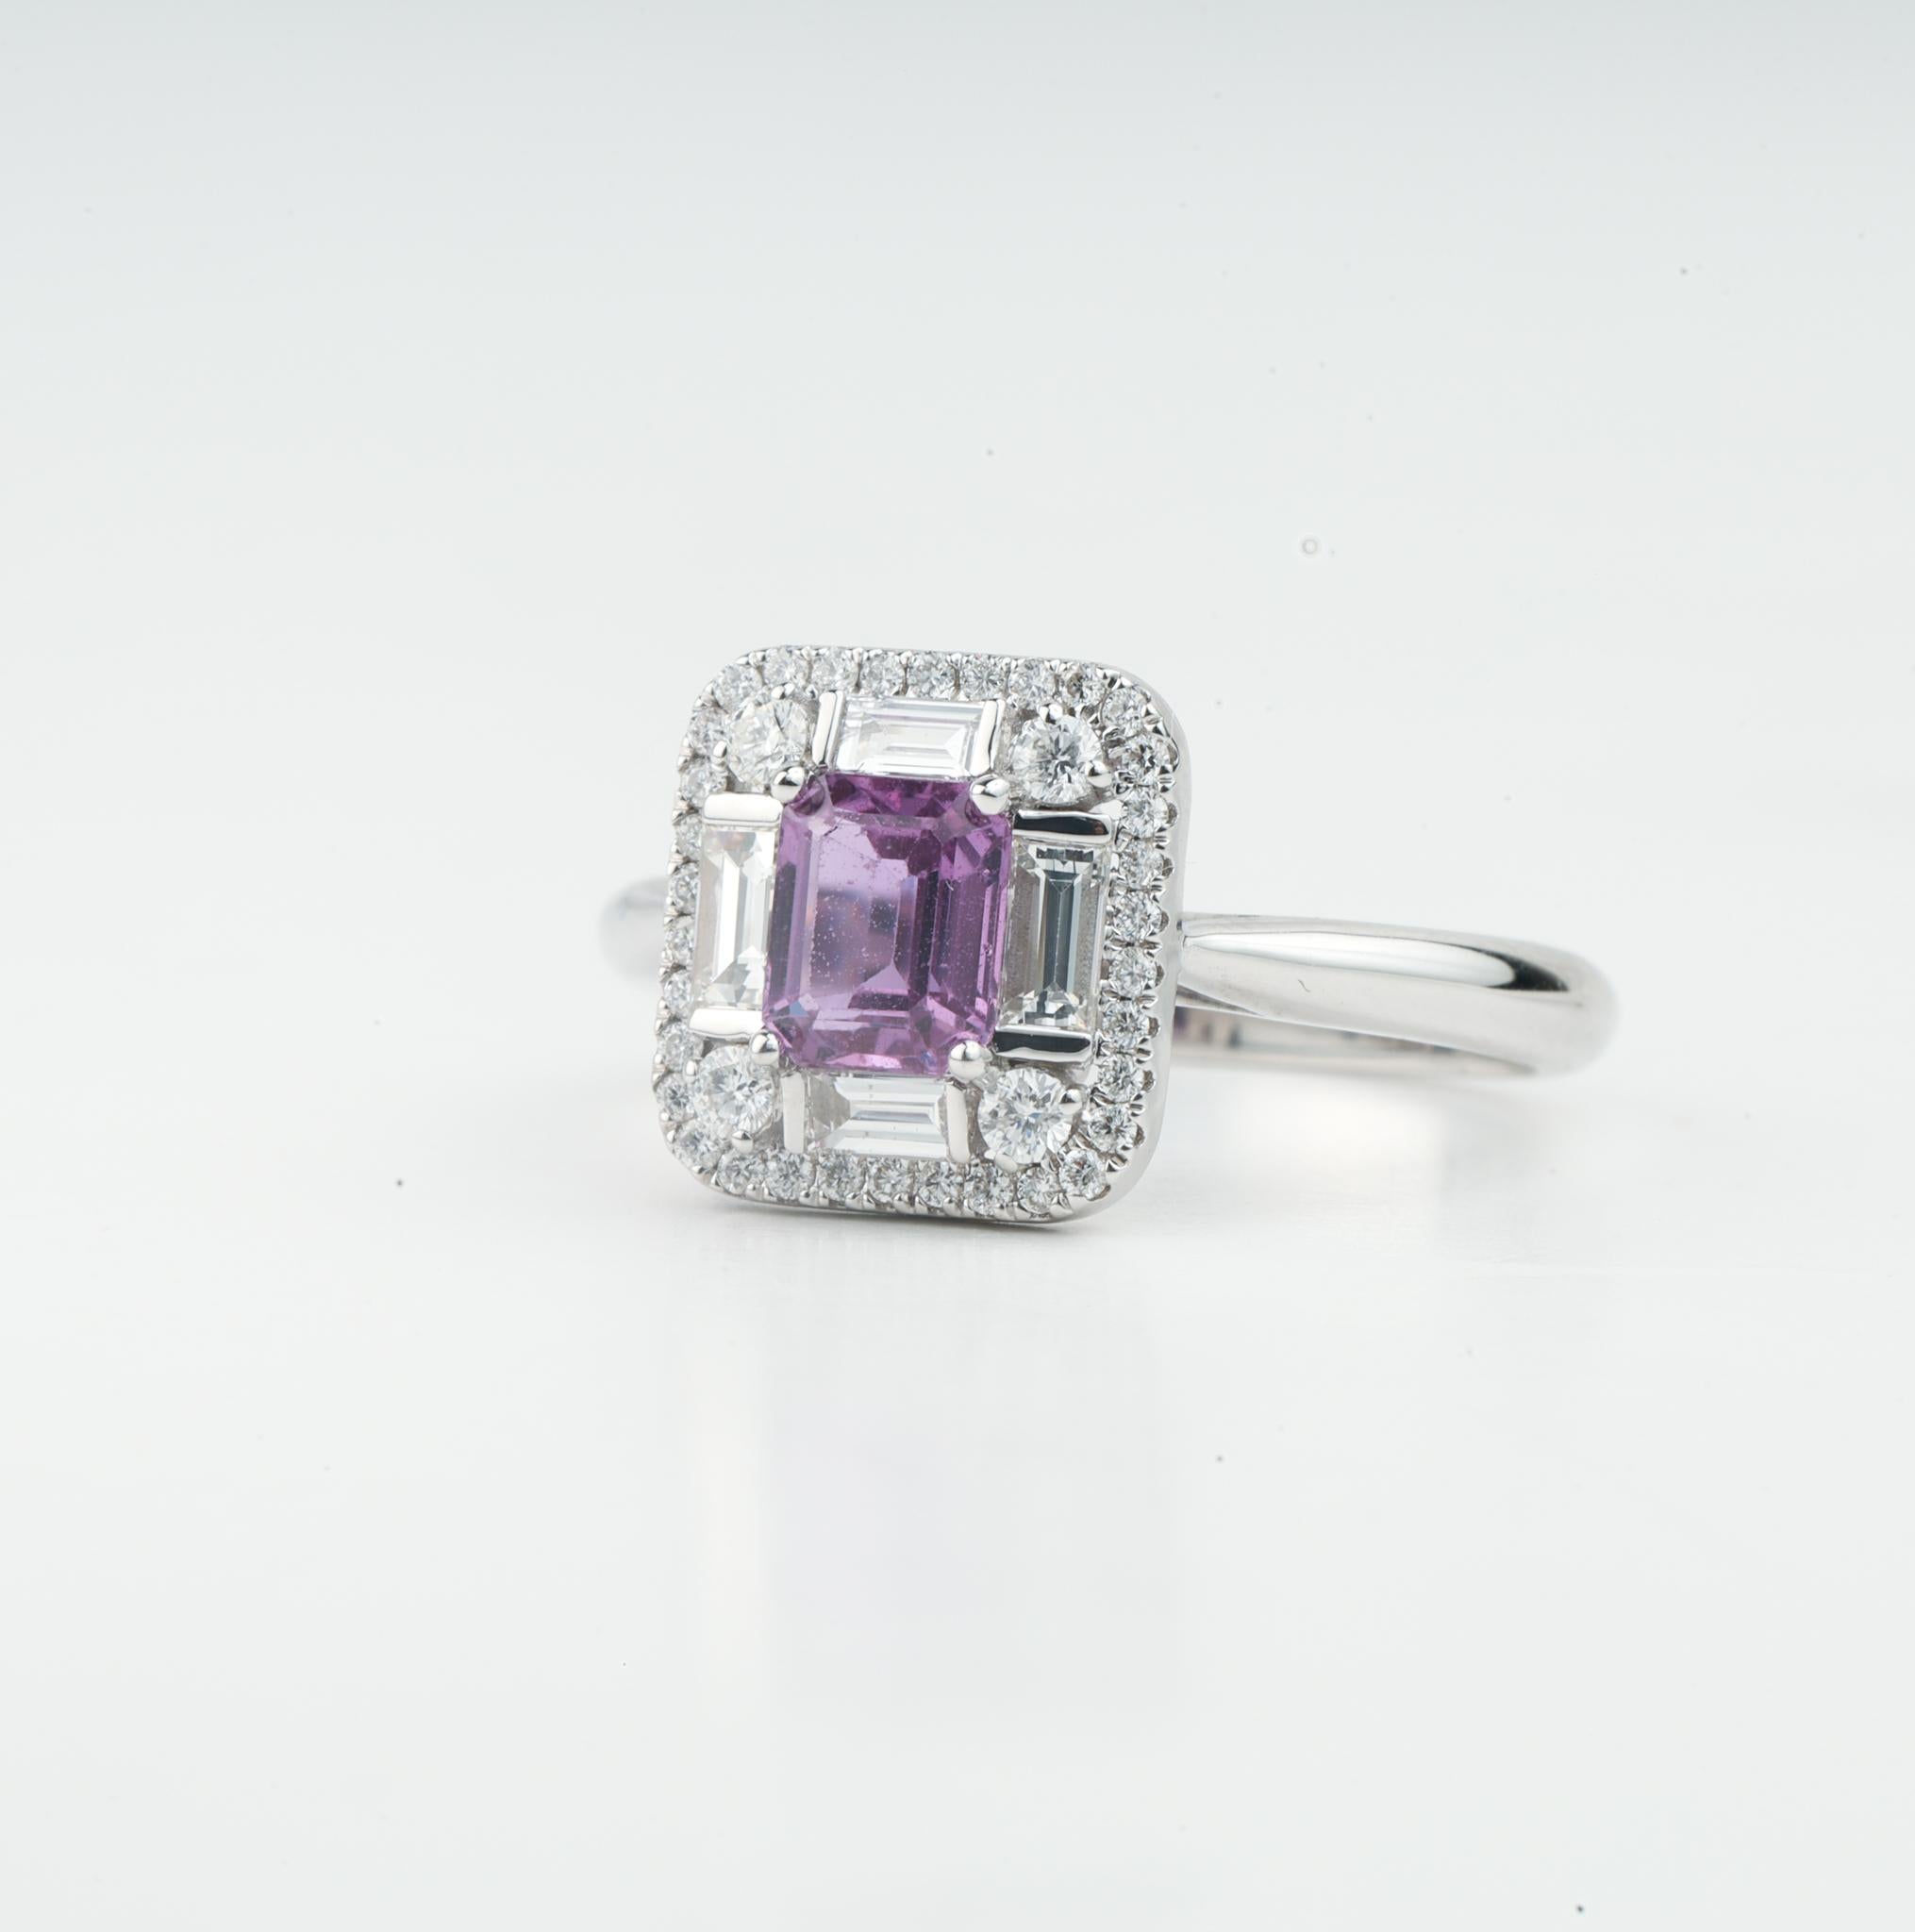 1 Carat Pink Sapphire Diamond Cocktail Engagement Ring in 18k White Gold In New Condition For Sale In Jaipur, RJ